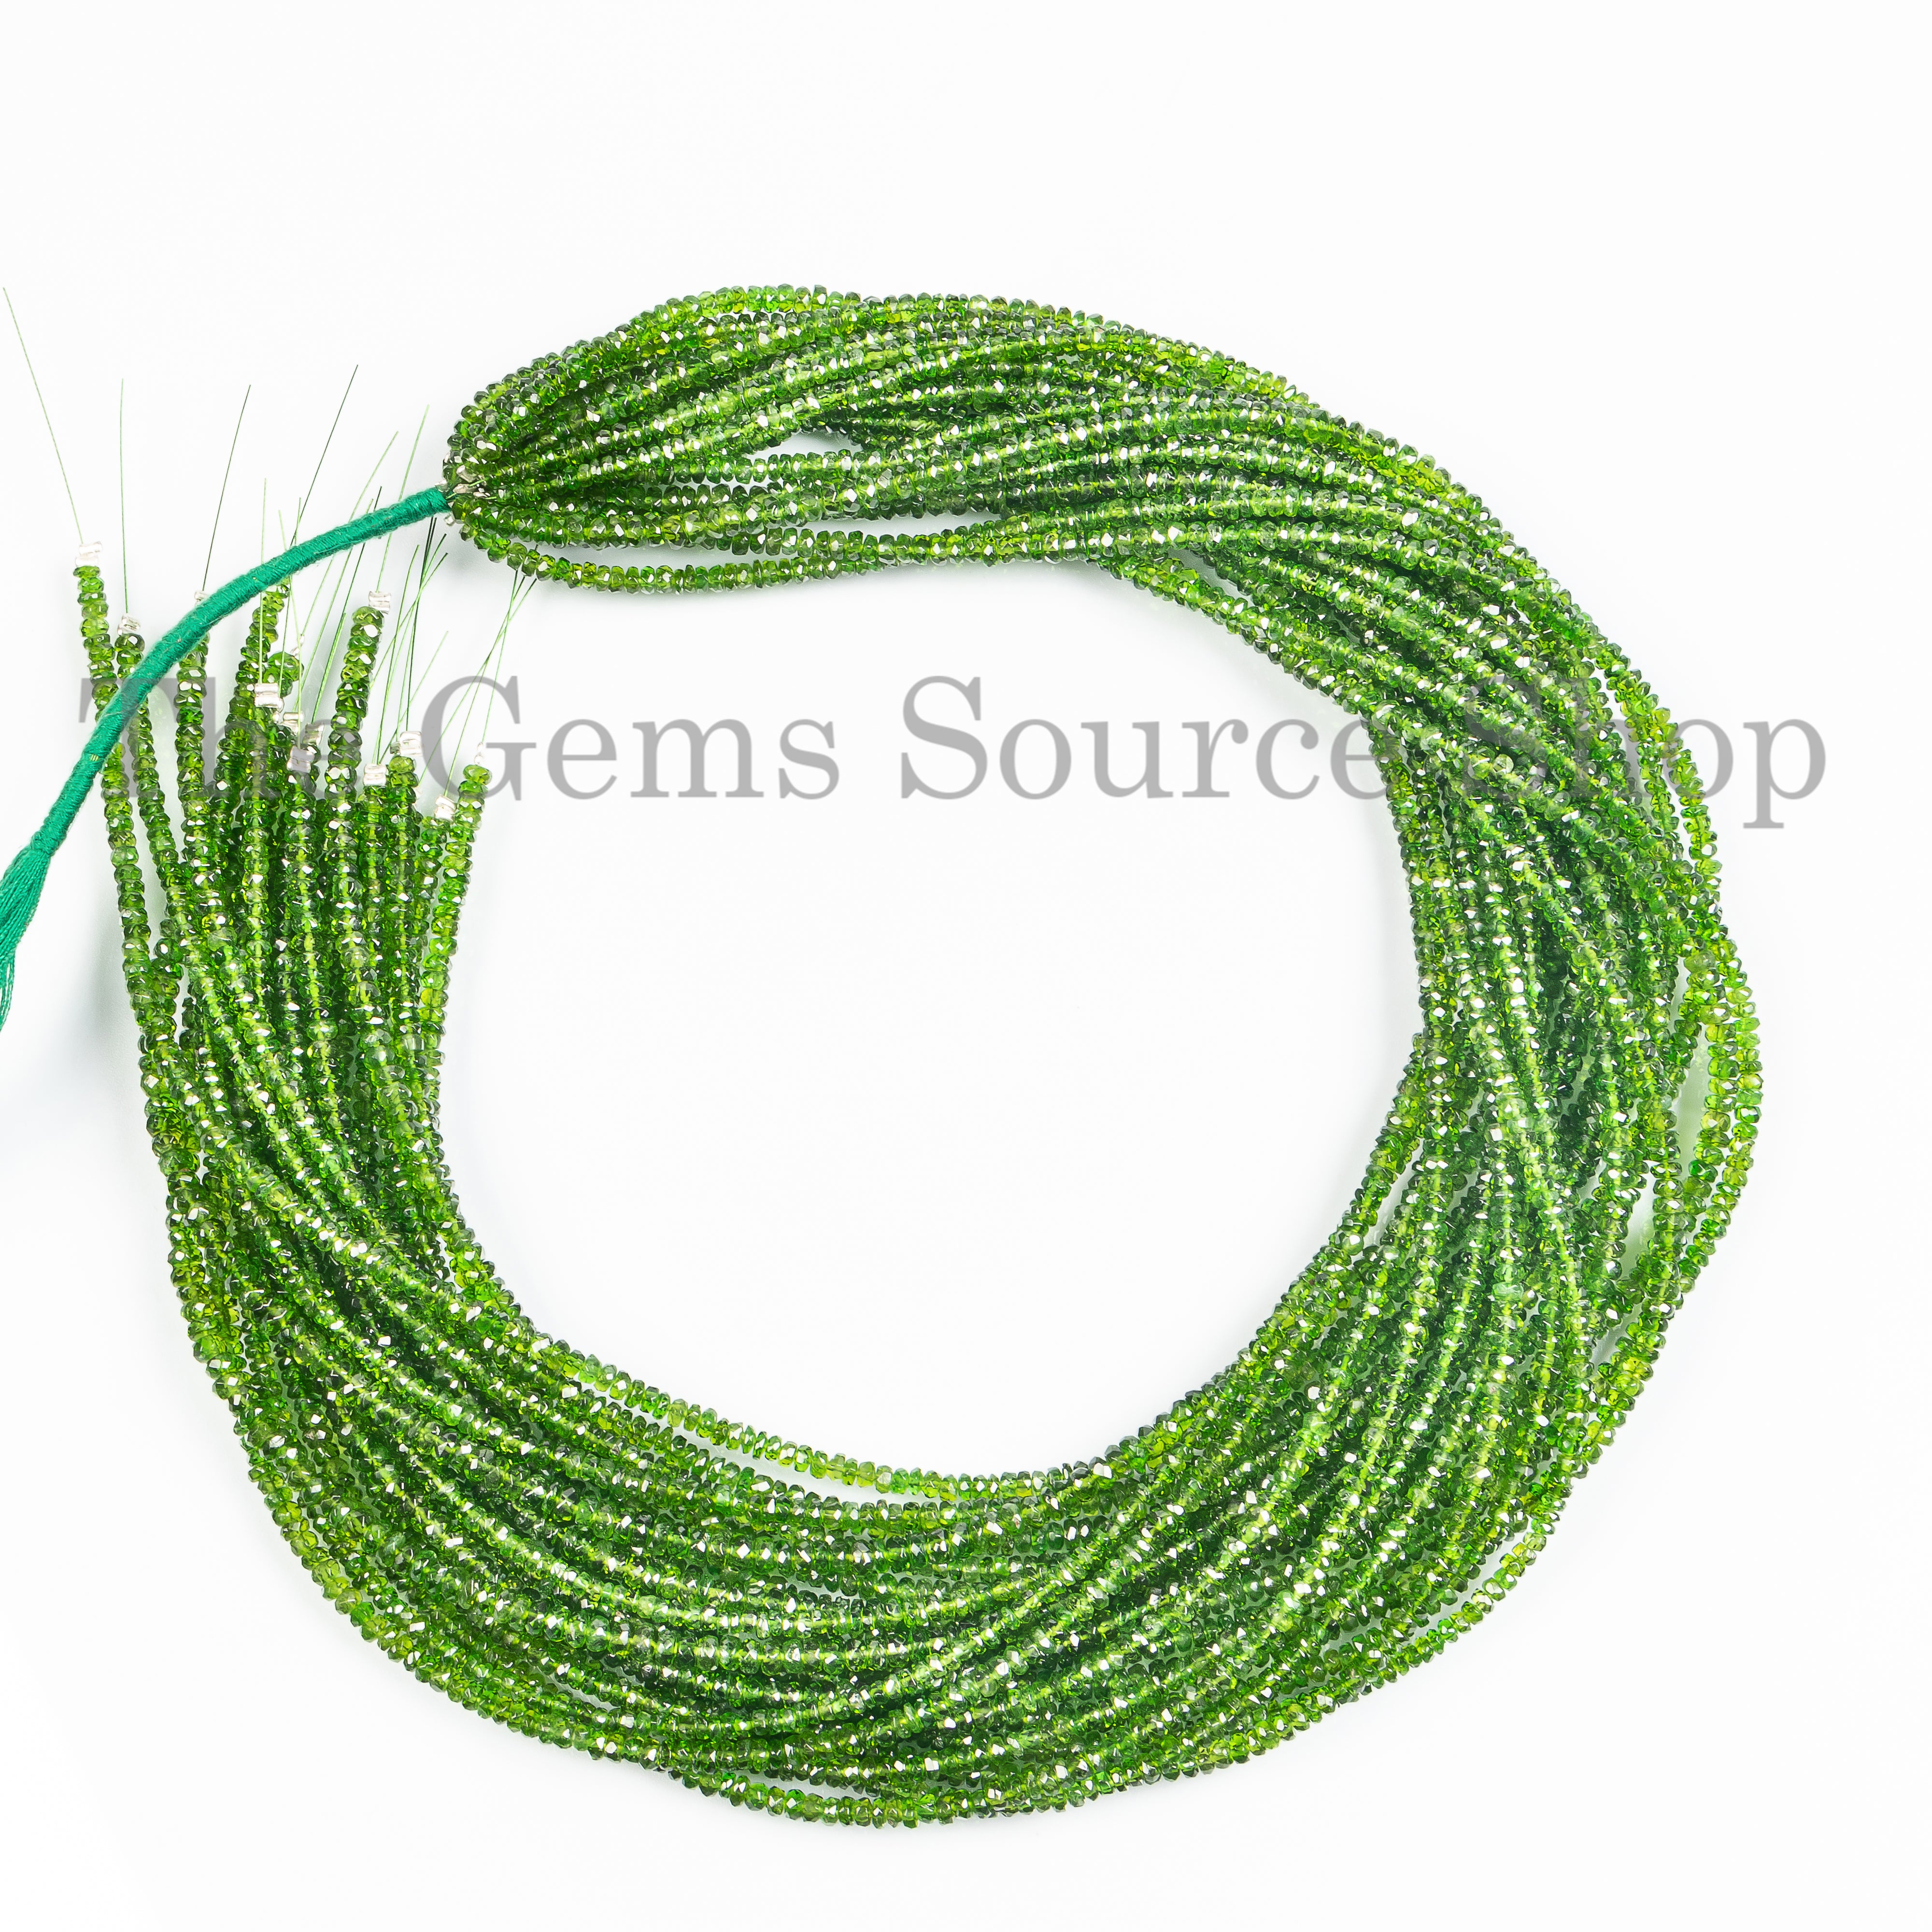 Top Quality Chrome Diopside Faceted Rondelle Beads,2.5-4mm Chrome Diopside Beads, Rondelle Beads, Chrome Diopside Rondelle, Gemstone Beads